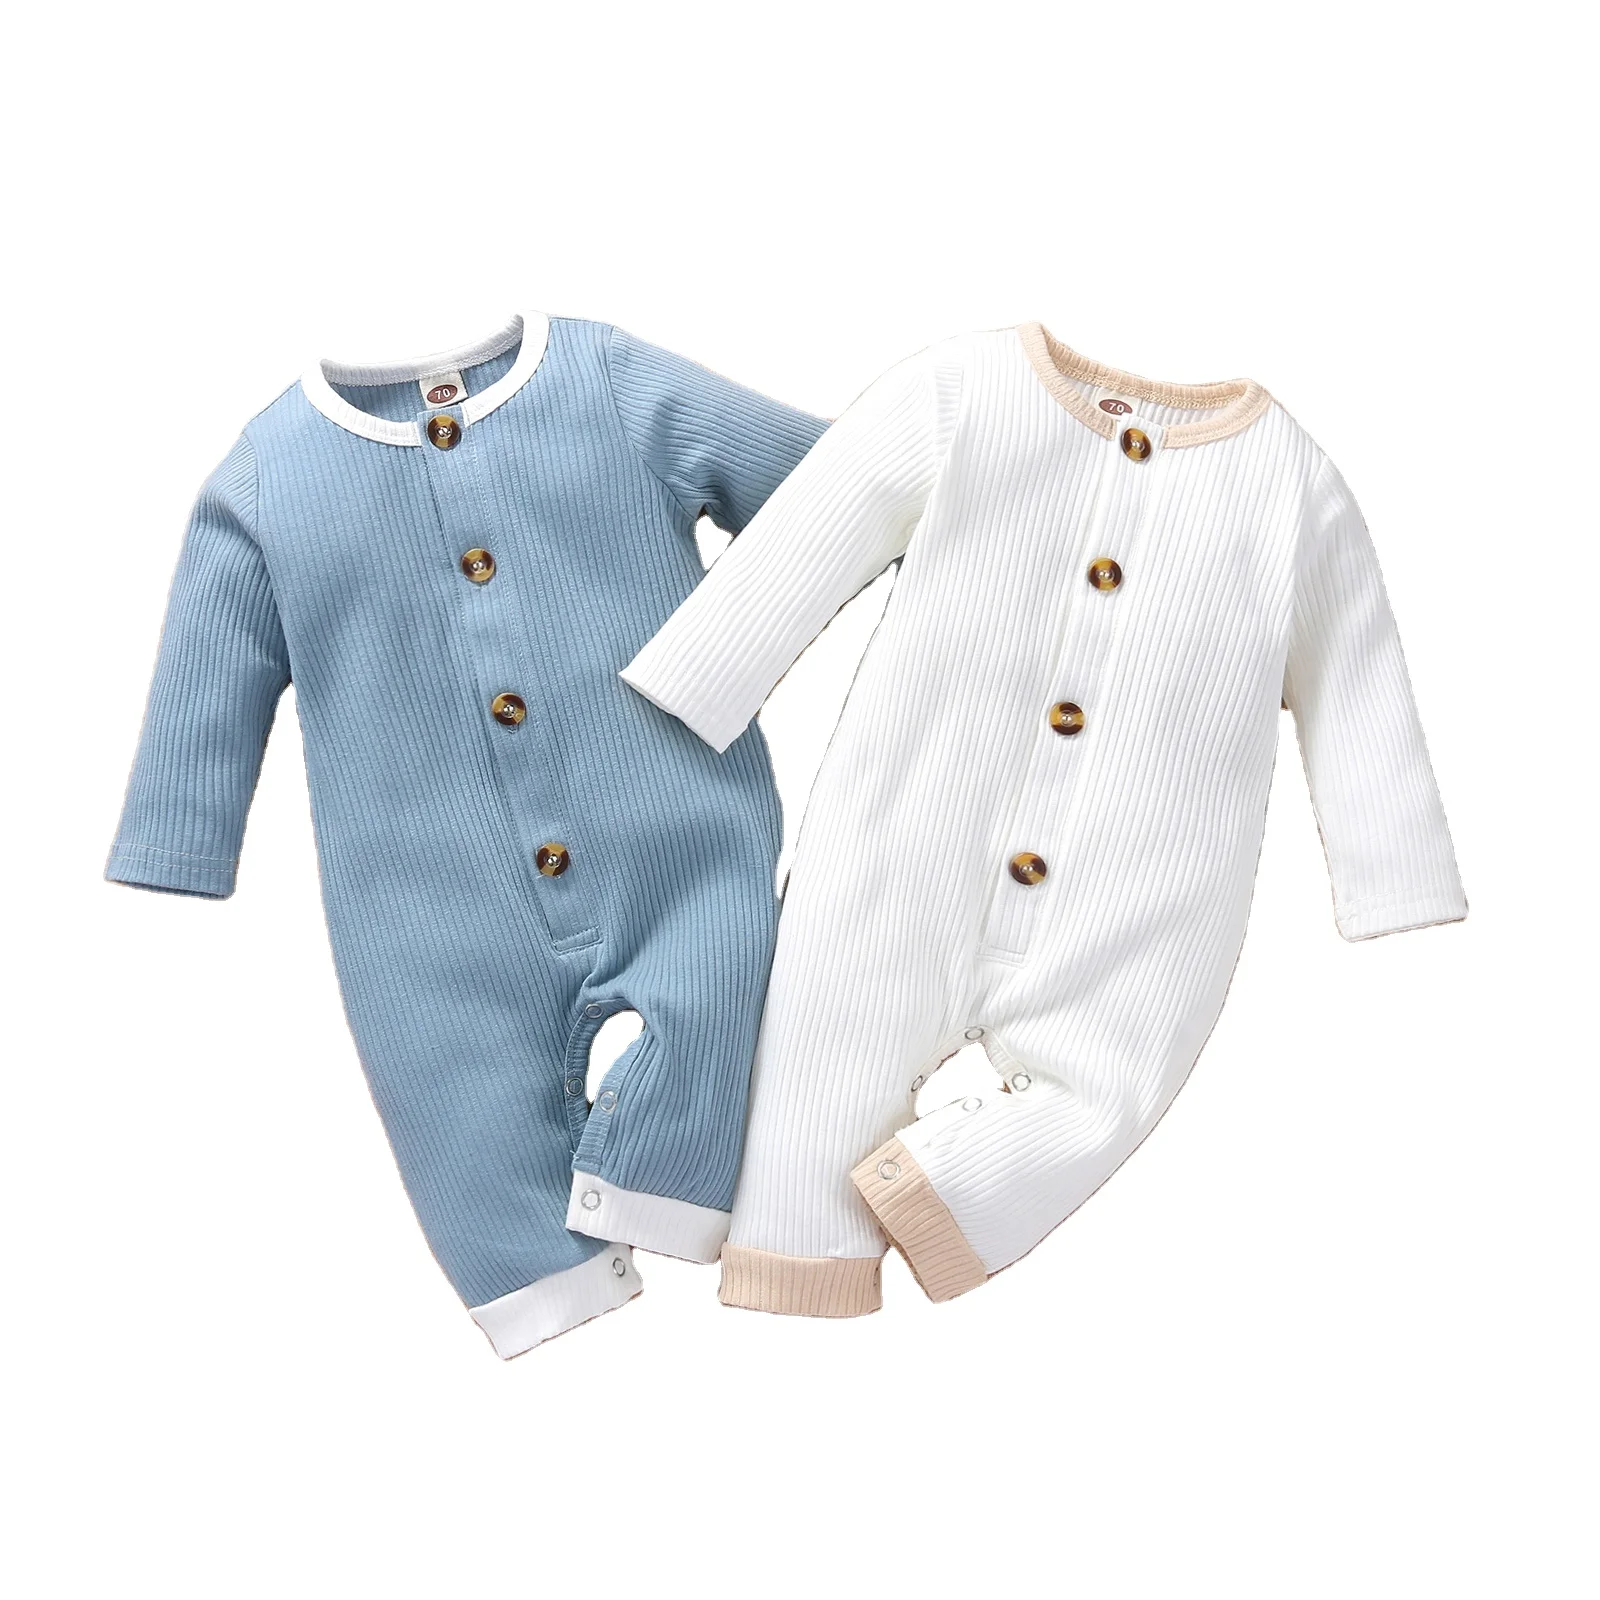 

Skin-friendly materials Onesie Baby Clothes Rib Knit Cotton Button Autumn Long Sleeve Children Boy Girl Outfits, Pic show